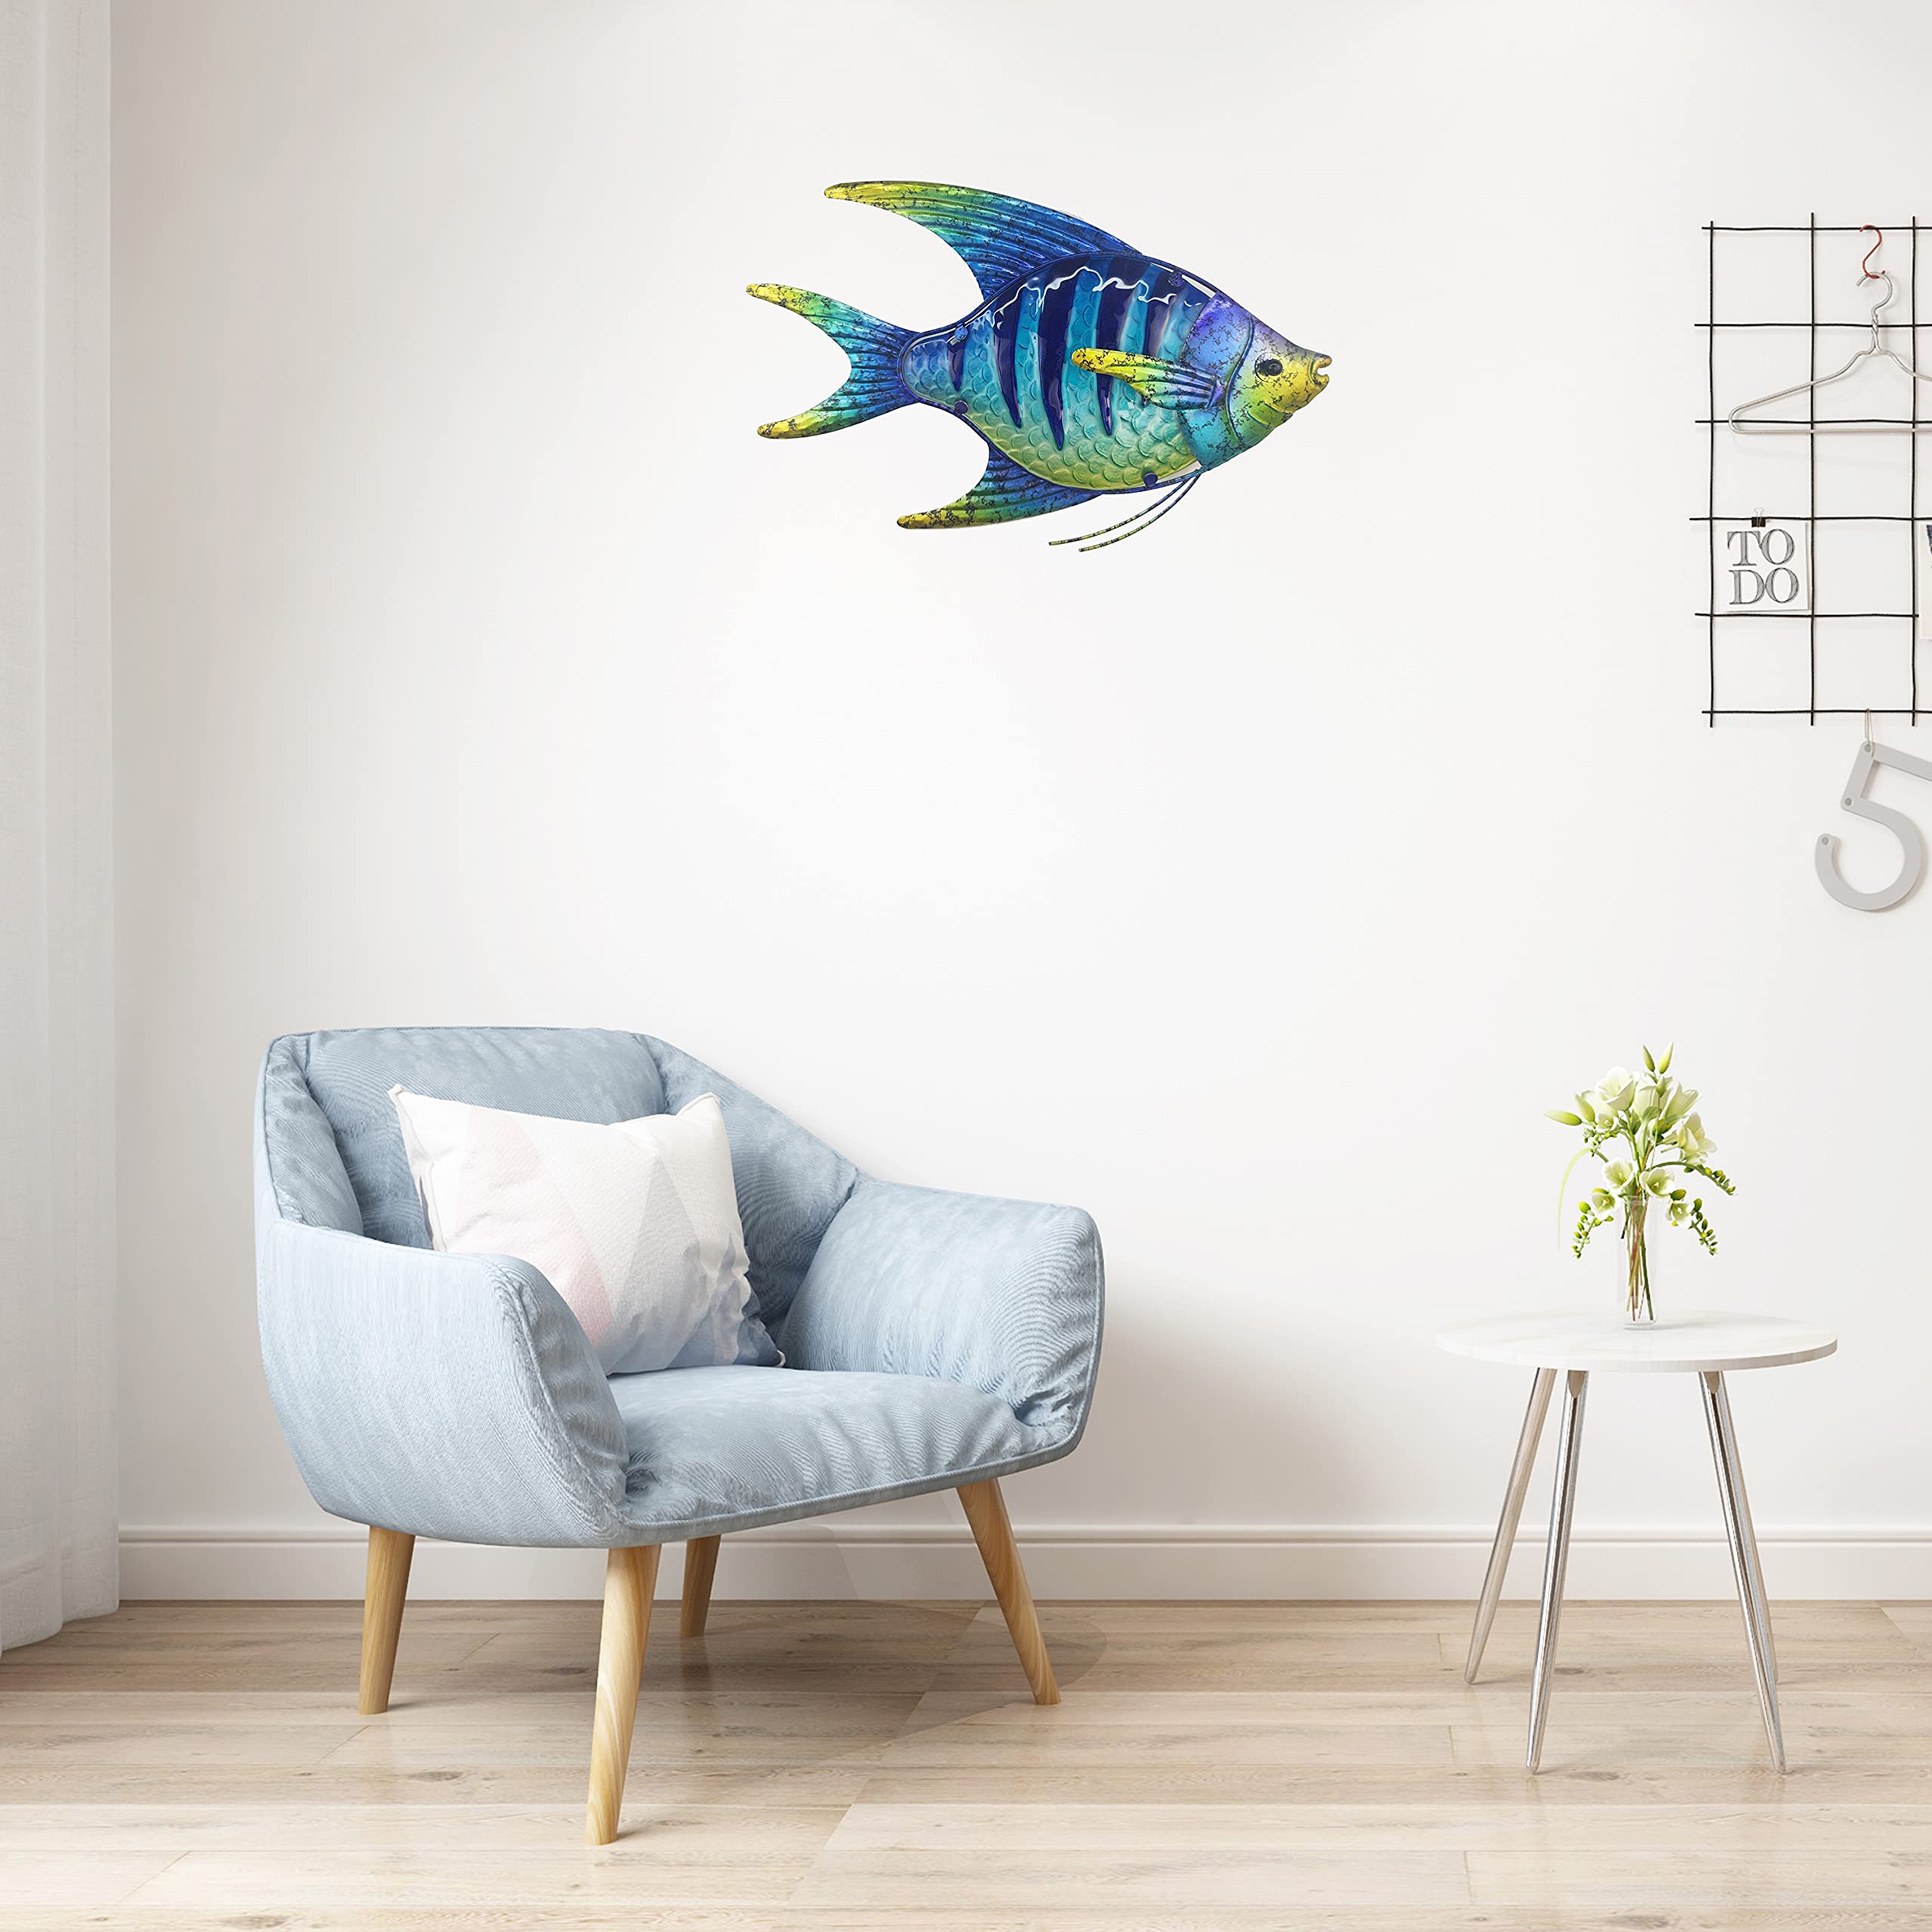 JOYBee 16.25Inch Large Metal Fish Wall Art Décor -Christmas Decorations-Perfect For Coastal，Nautical，Beach Or Boat-Decorations for Indoor Outdoor Kitchen Bathroom Patio Pool or Porch(Blue)